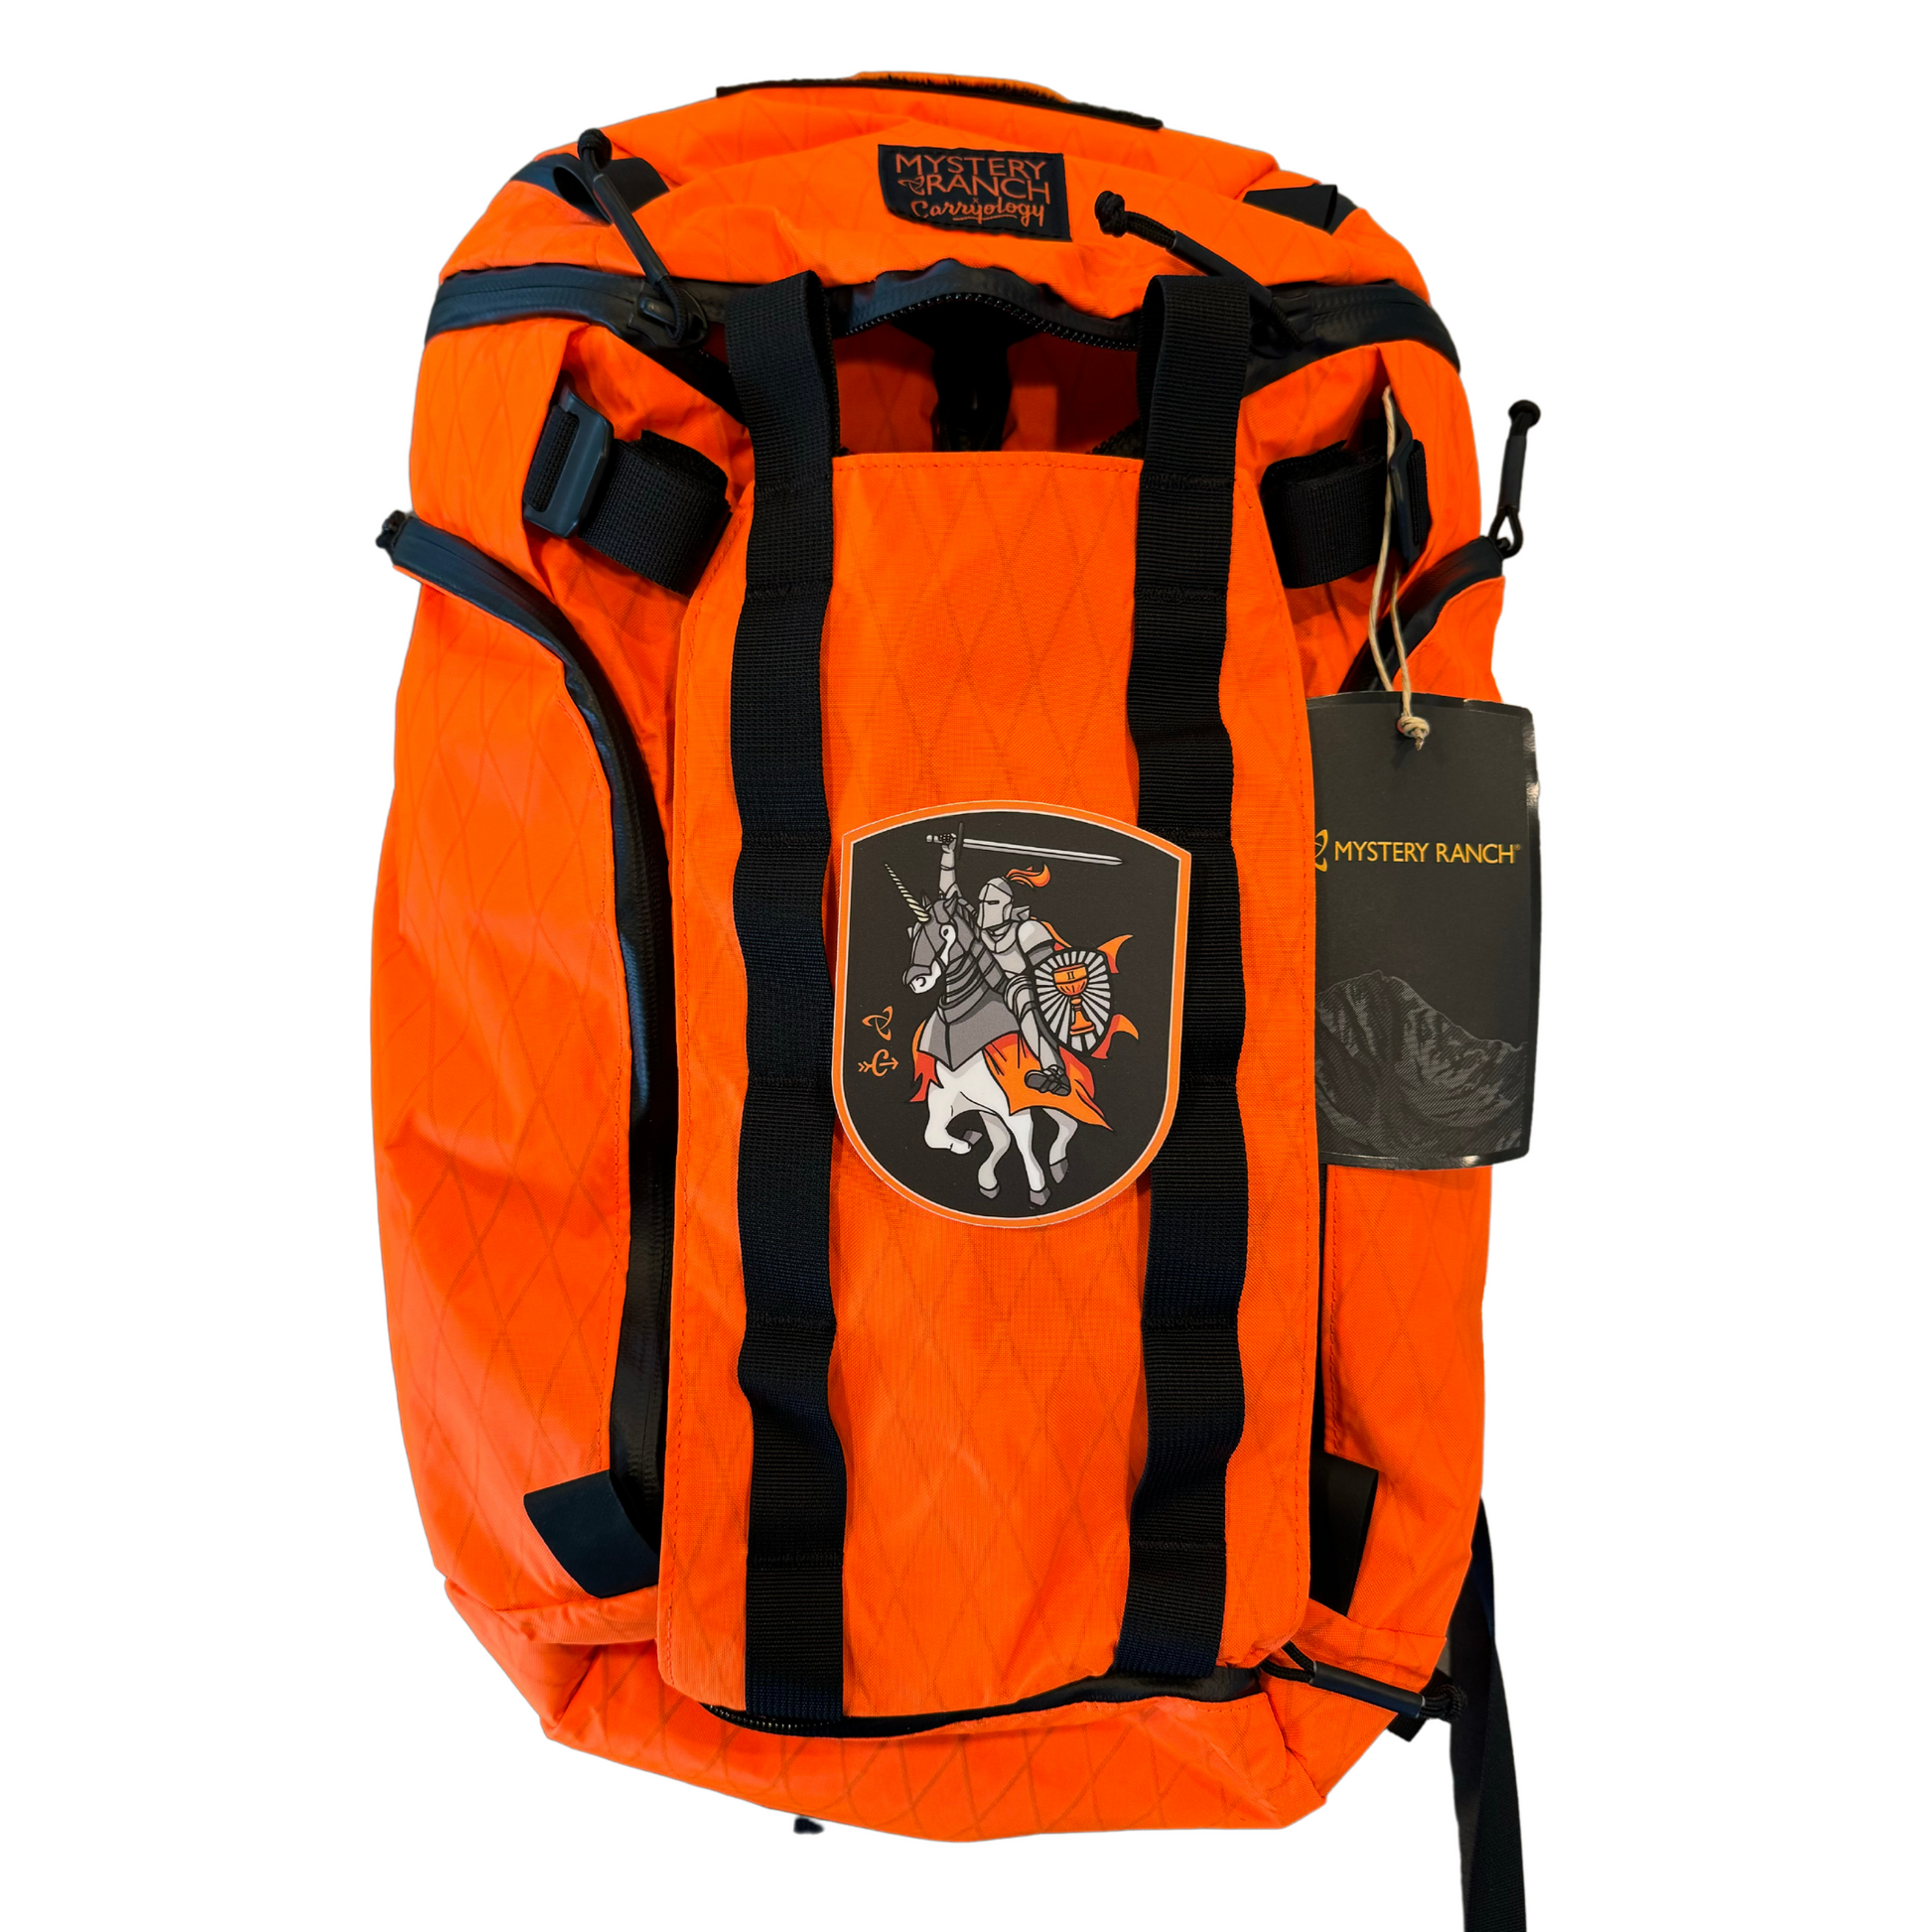 Mystery Ranch x Carryology Unicorn 2.0 Backpack - Orange – The 